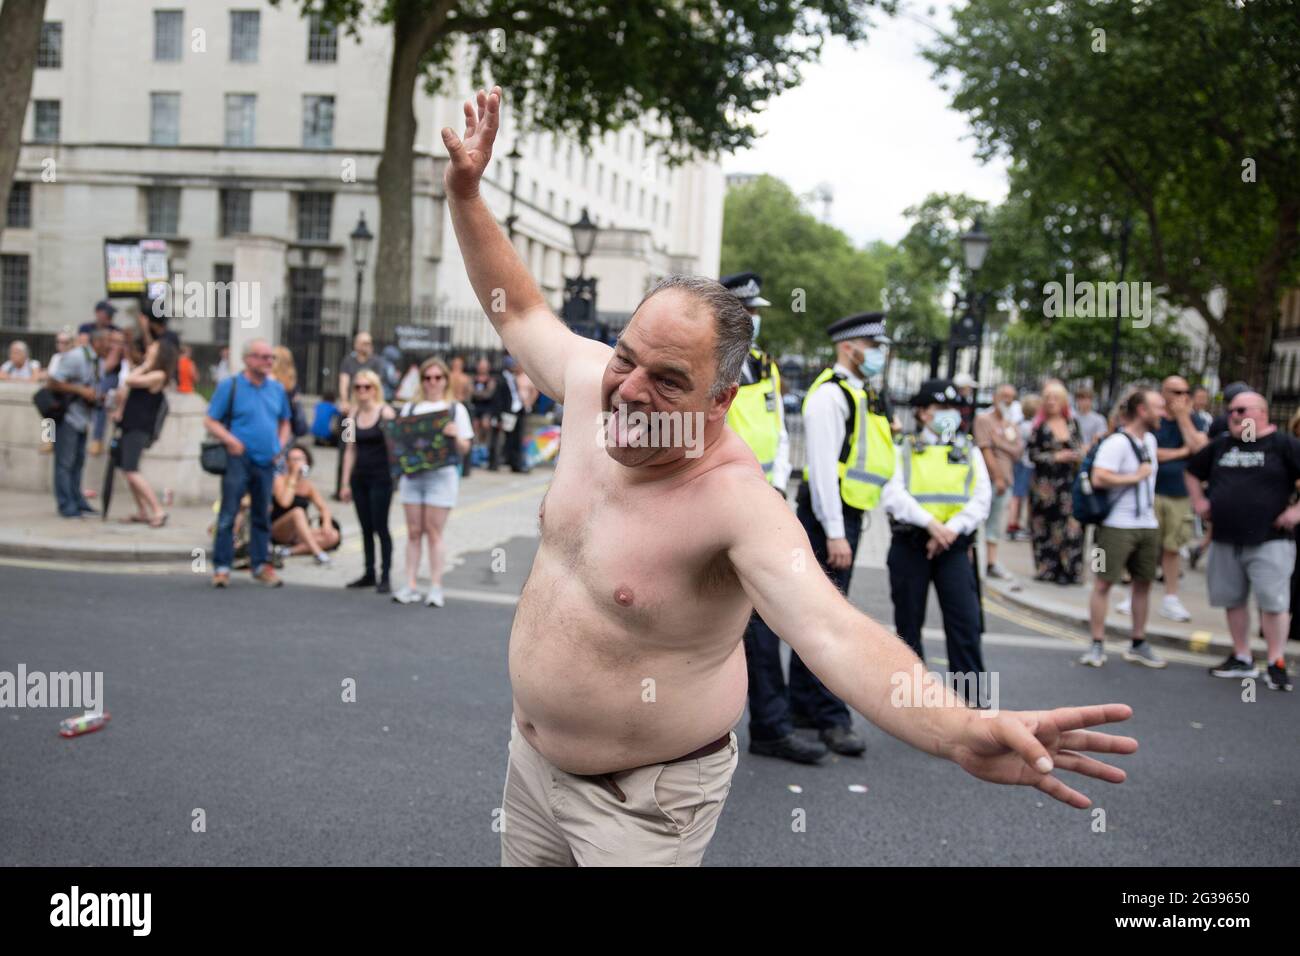 London, UK. 14th June 2021. Drunk anti-vaxx protester shouts F-word to Downing Street. Yuen Ching Ng/Alamy Live News Stock Photo